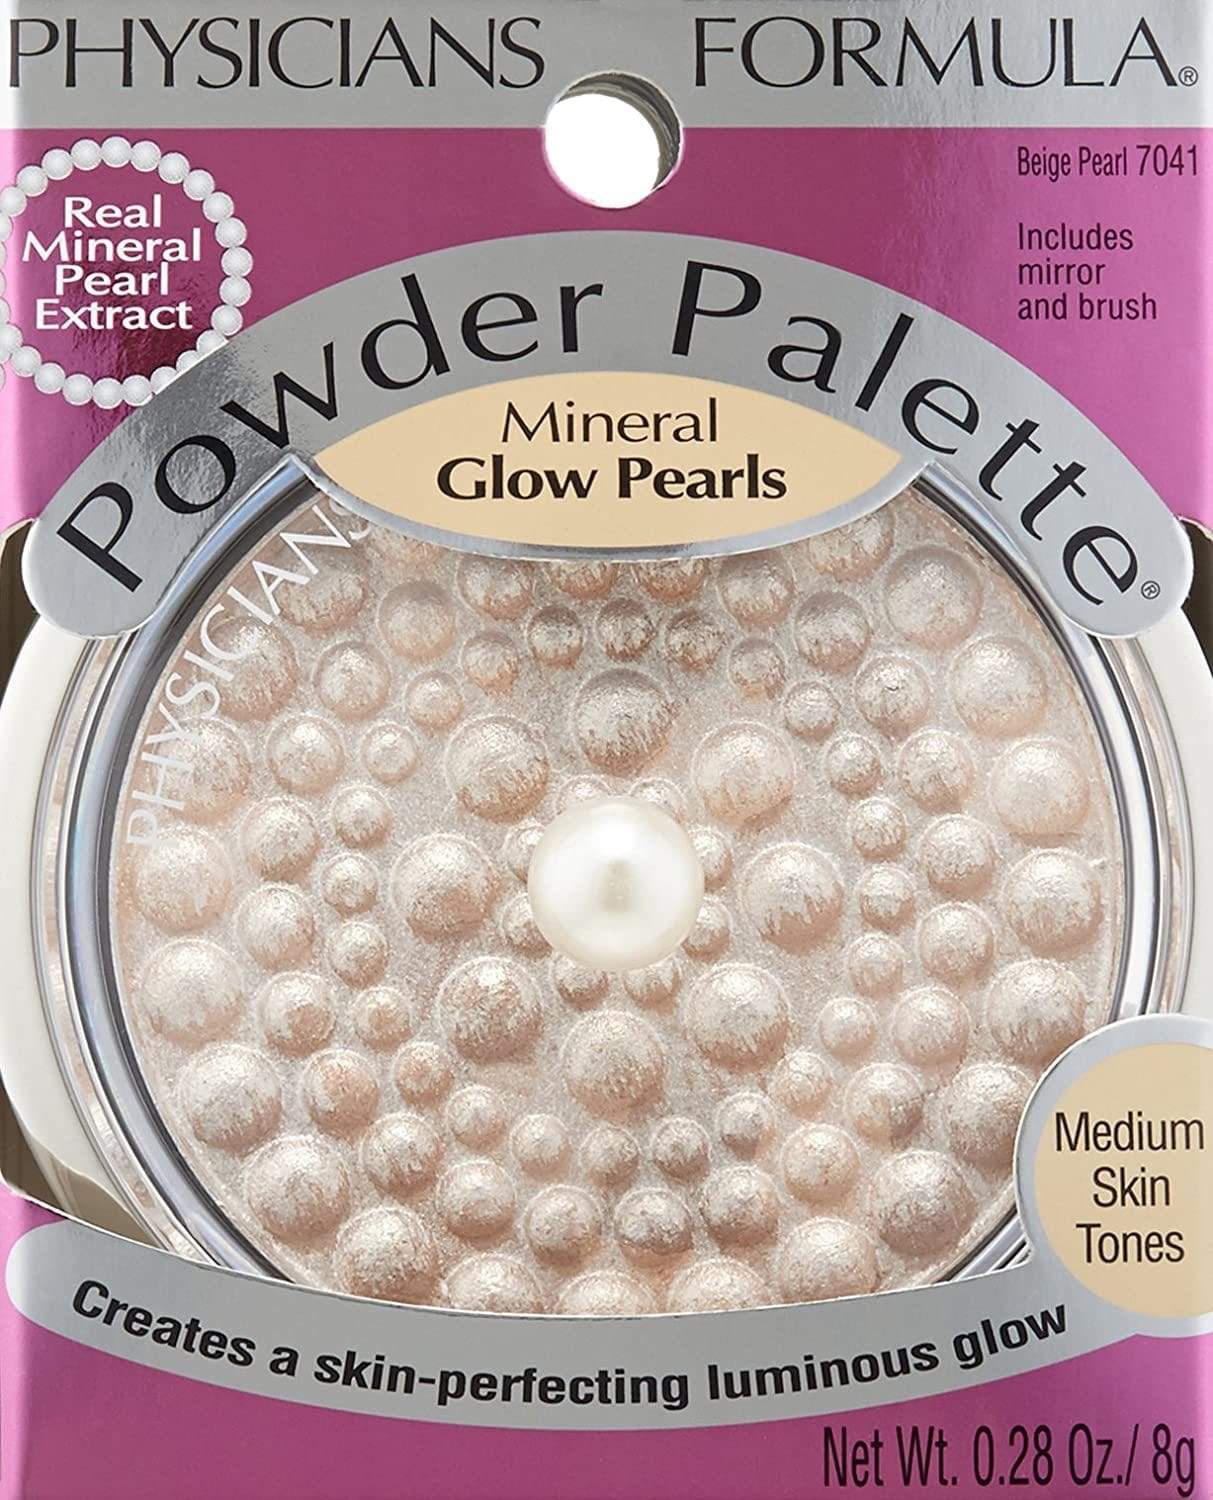 PHYSICIANS FORMULA Powder Palette Mineral Glow Pearls, Beige Pearl, highlighter, London Loves Beauty